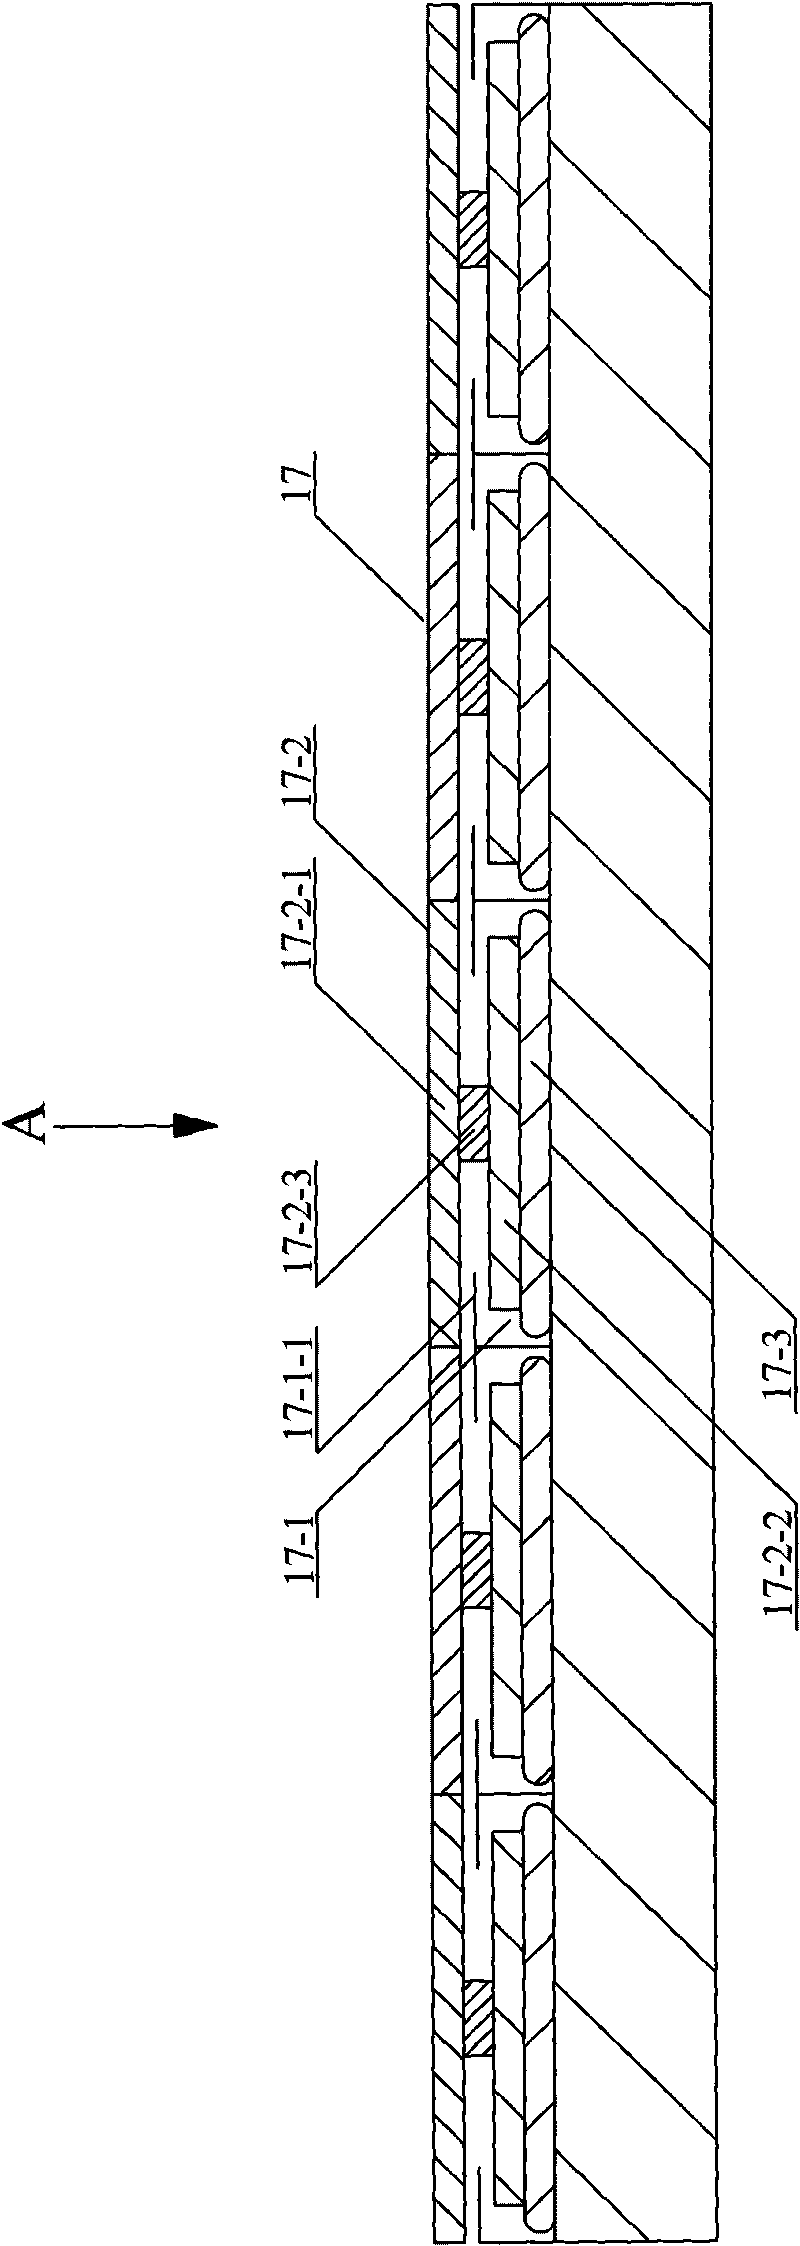 Planar and lateral strain controlled triaxial apparatus